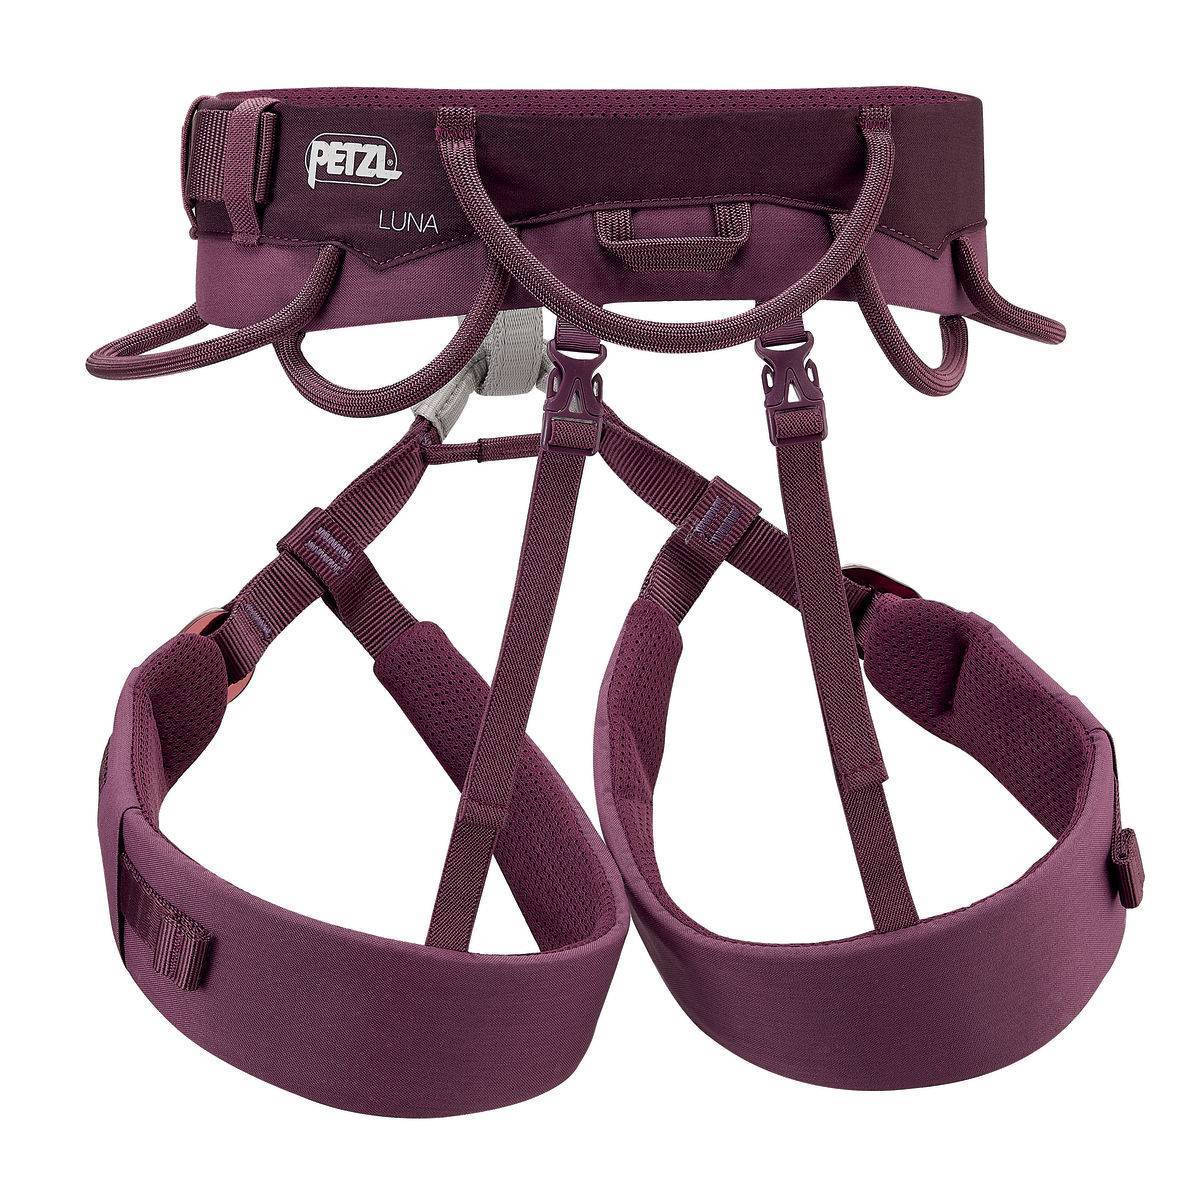 Luna Advanced Climbing And Mountaineering Harness Petzl